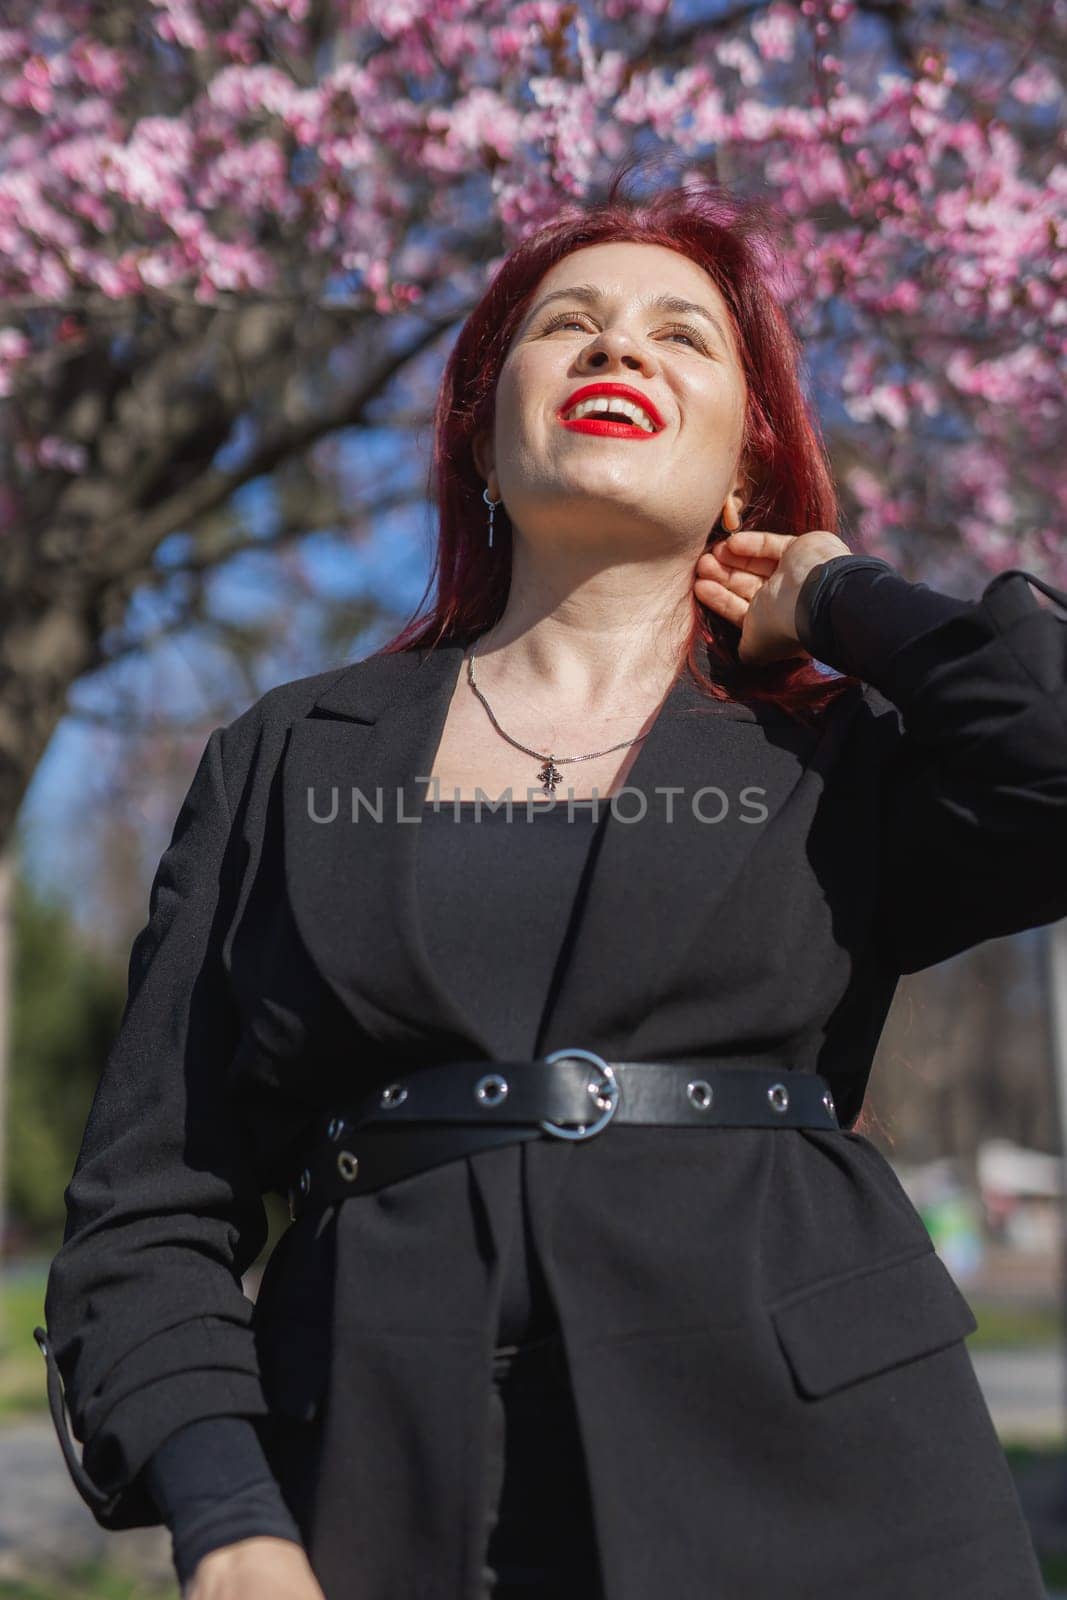 Fashion outdoor photo of beautiful woman with red curly hair in elegant suit posing in spring flowering park with blooming cherry tree. Copy space and empty place for advertising text by Satura86